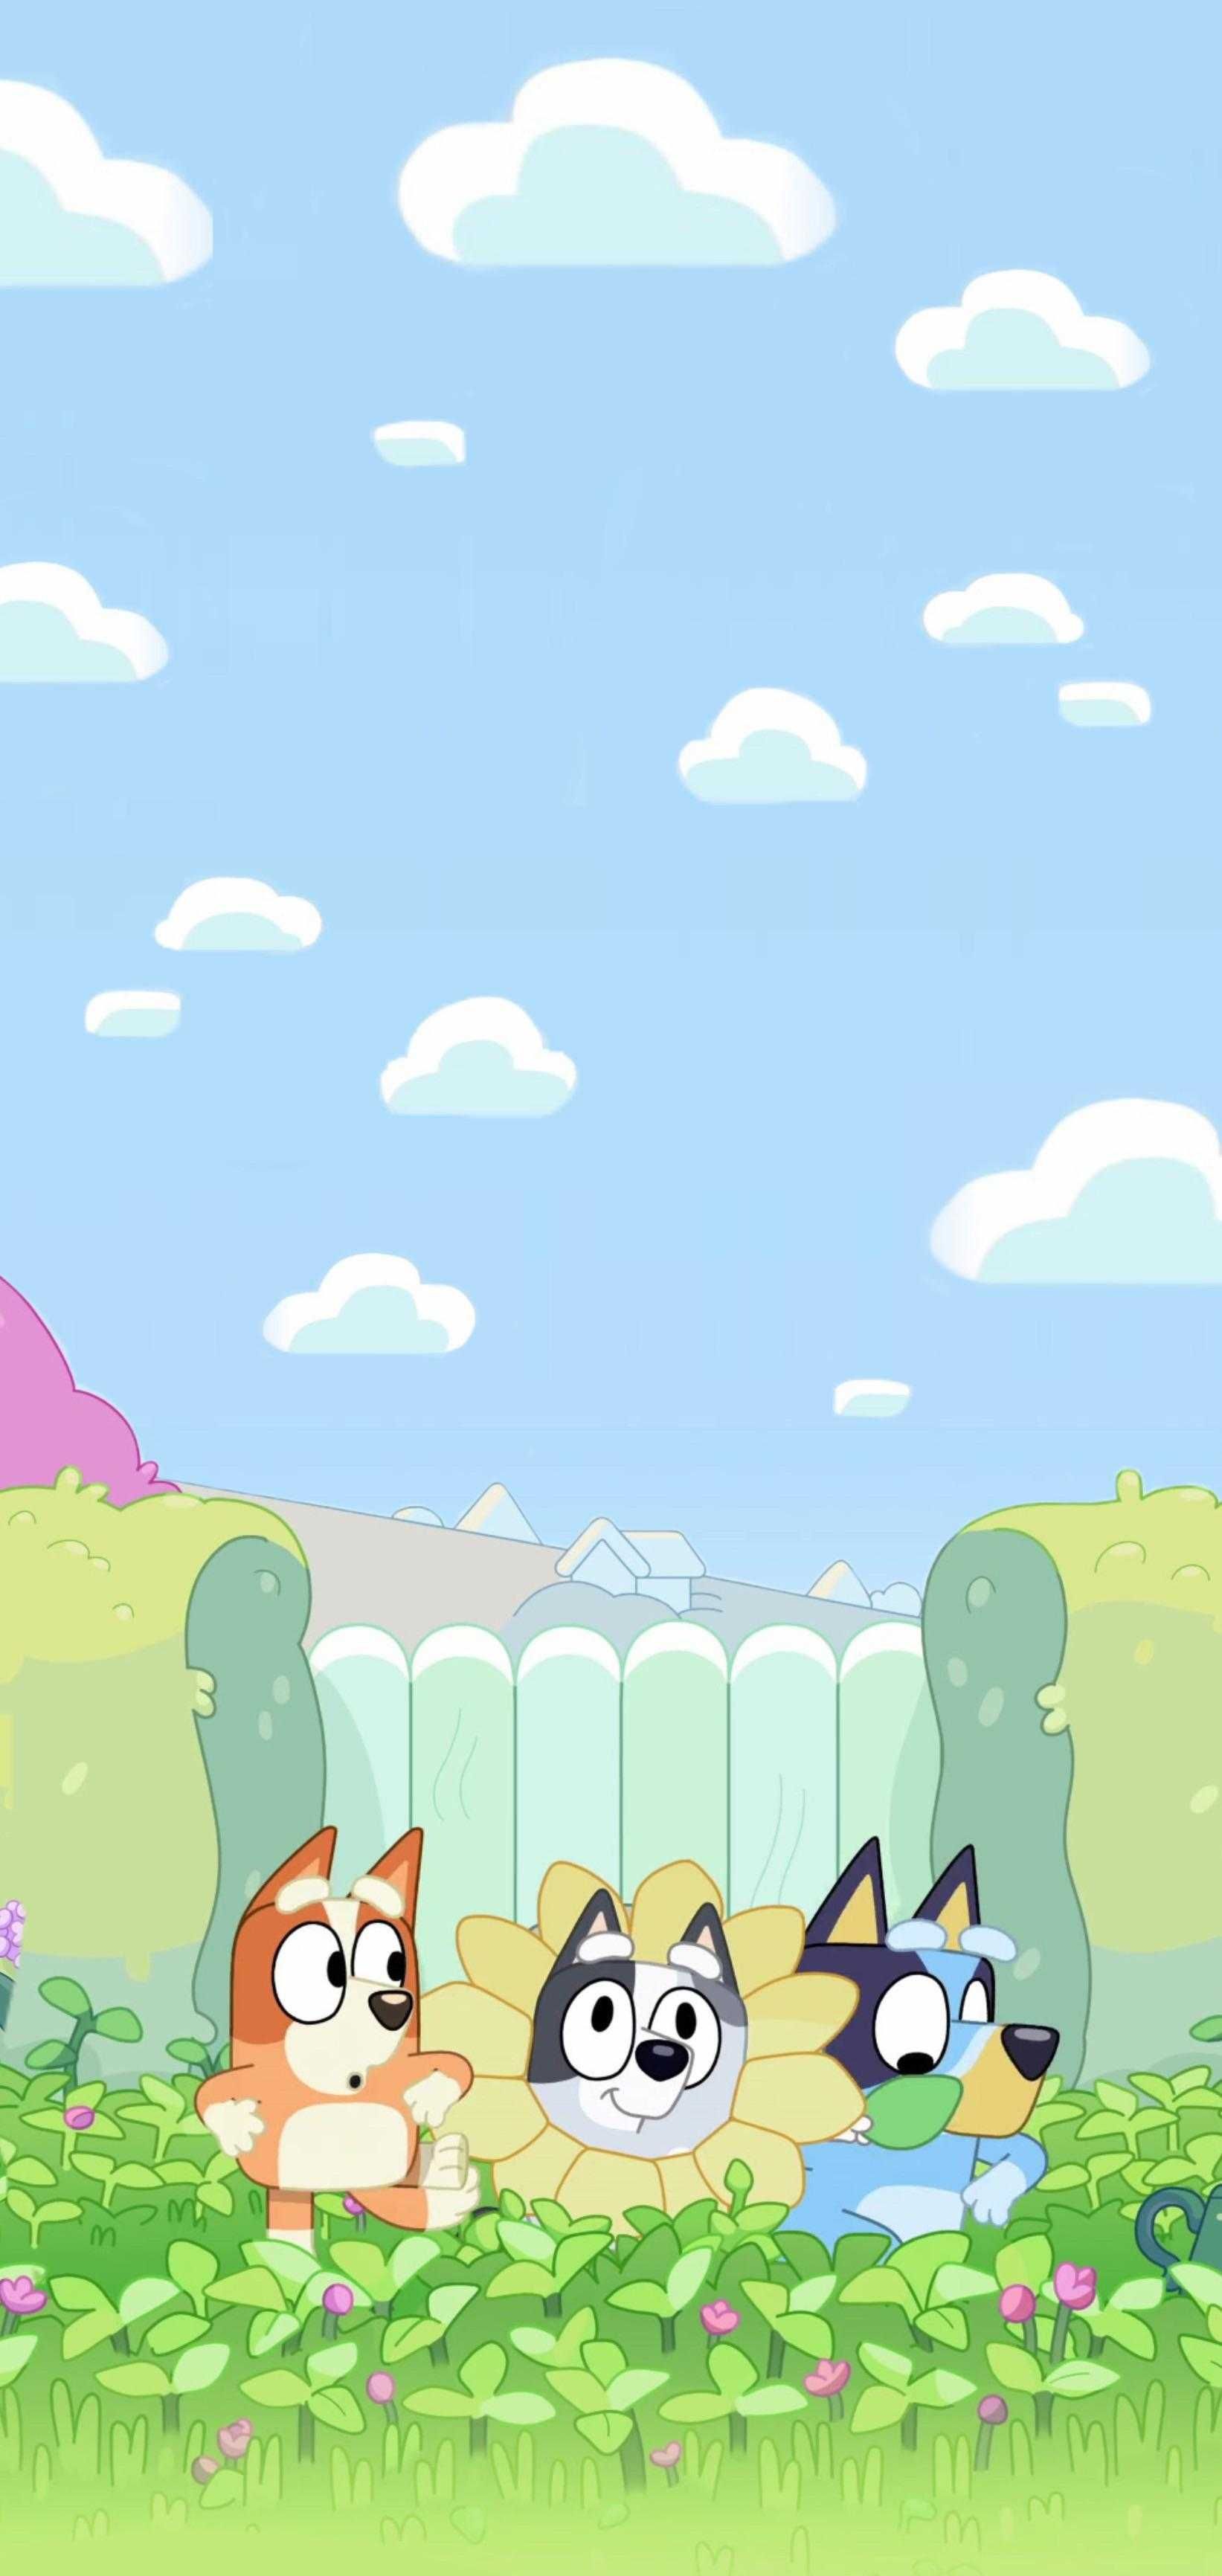 Bluey Wallpaper Browse Bluey Wallpaper with collections of Always Tomorrow, Animated, Bingo, Bluey, Disney Jun. Cute pokemon picture, Wallpaper, Pokemon picture